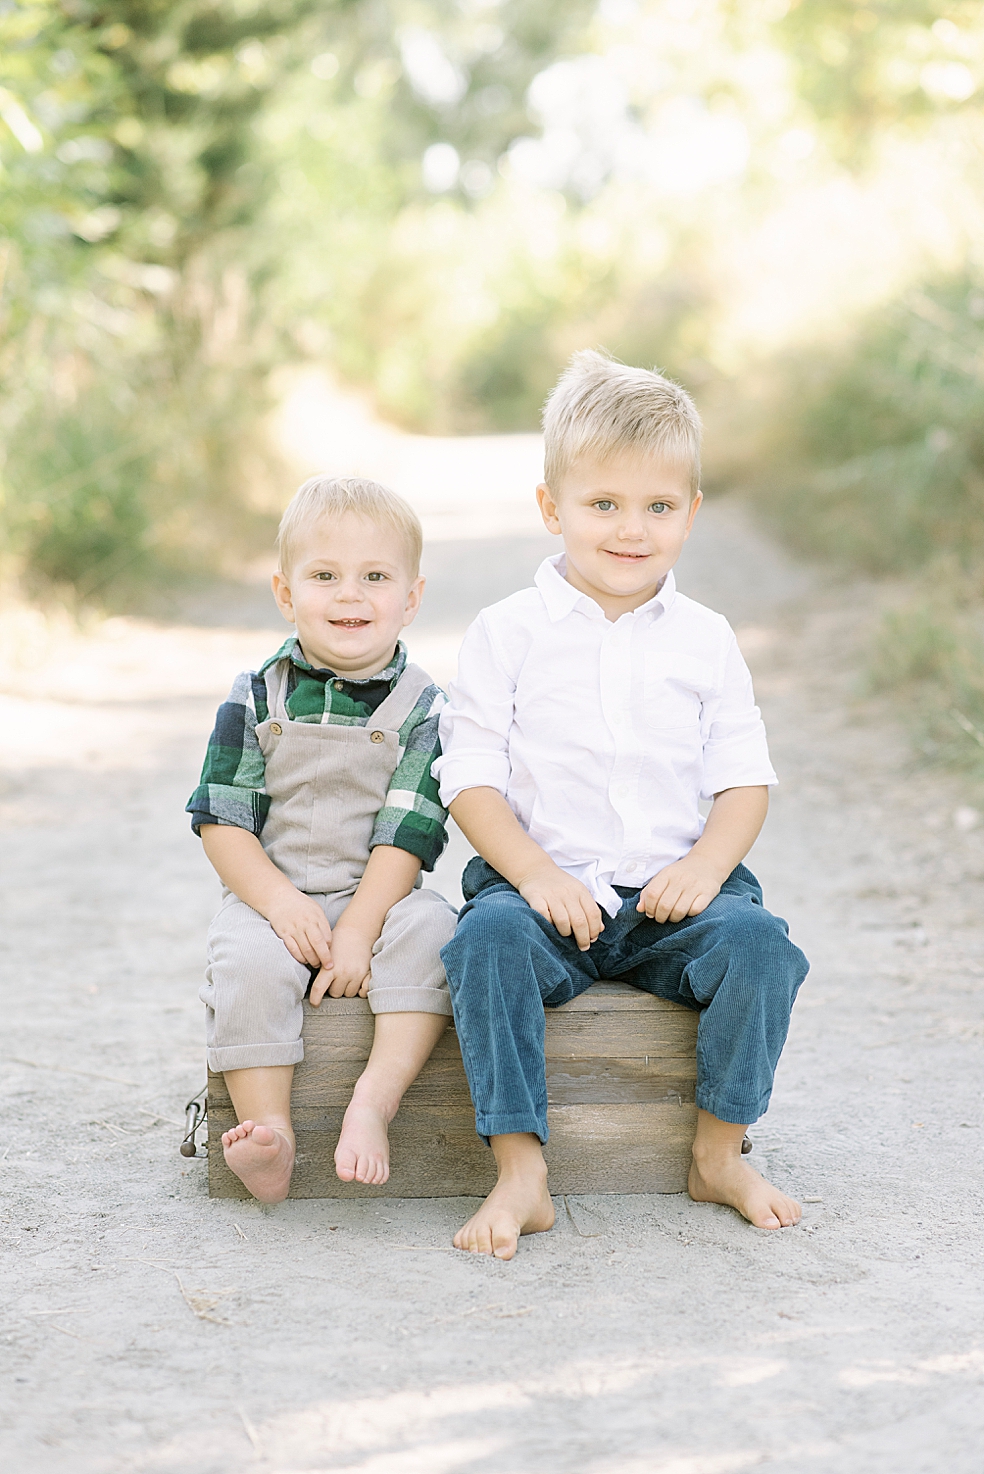 Blonde brothers sitting on a box together smiling | Photo by Jessica Lee Photography